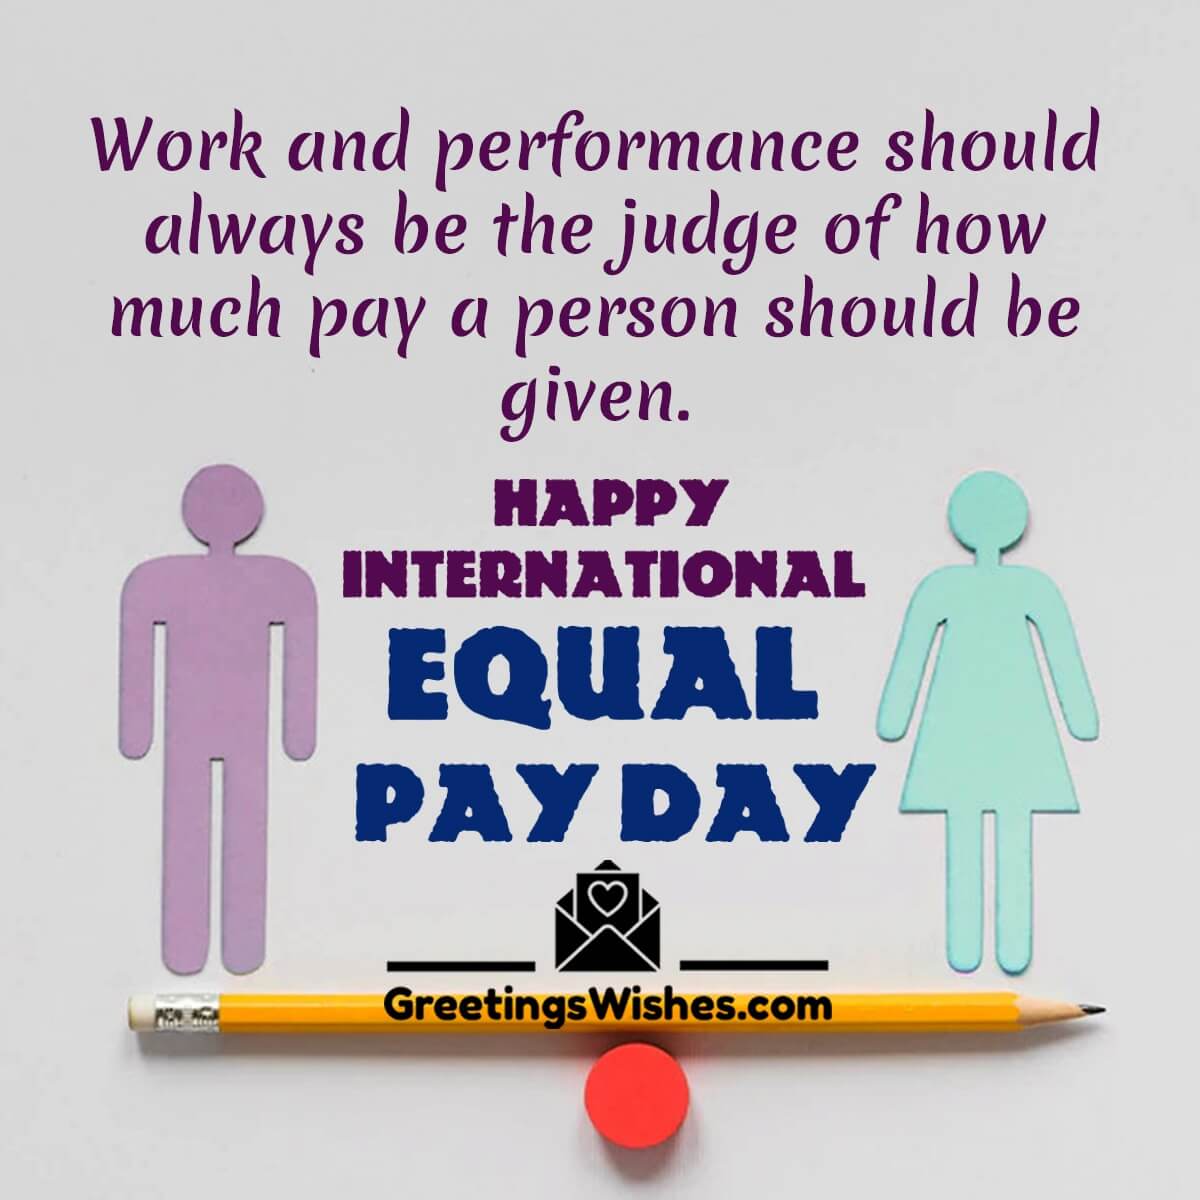 International Equal Pay Day Message